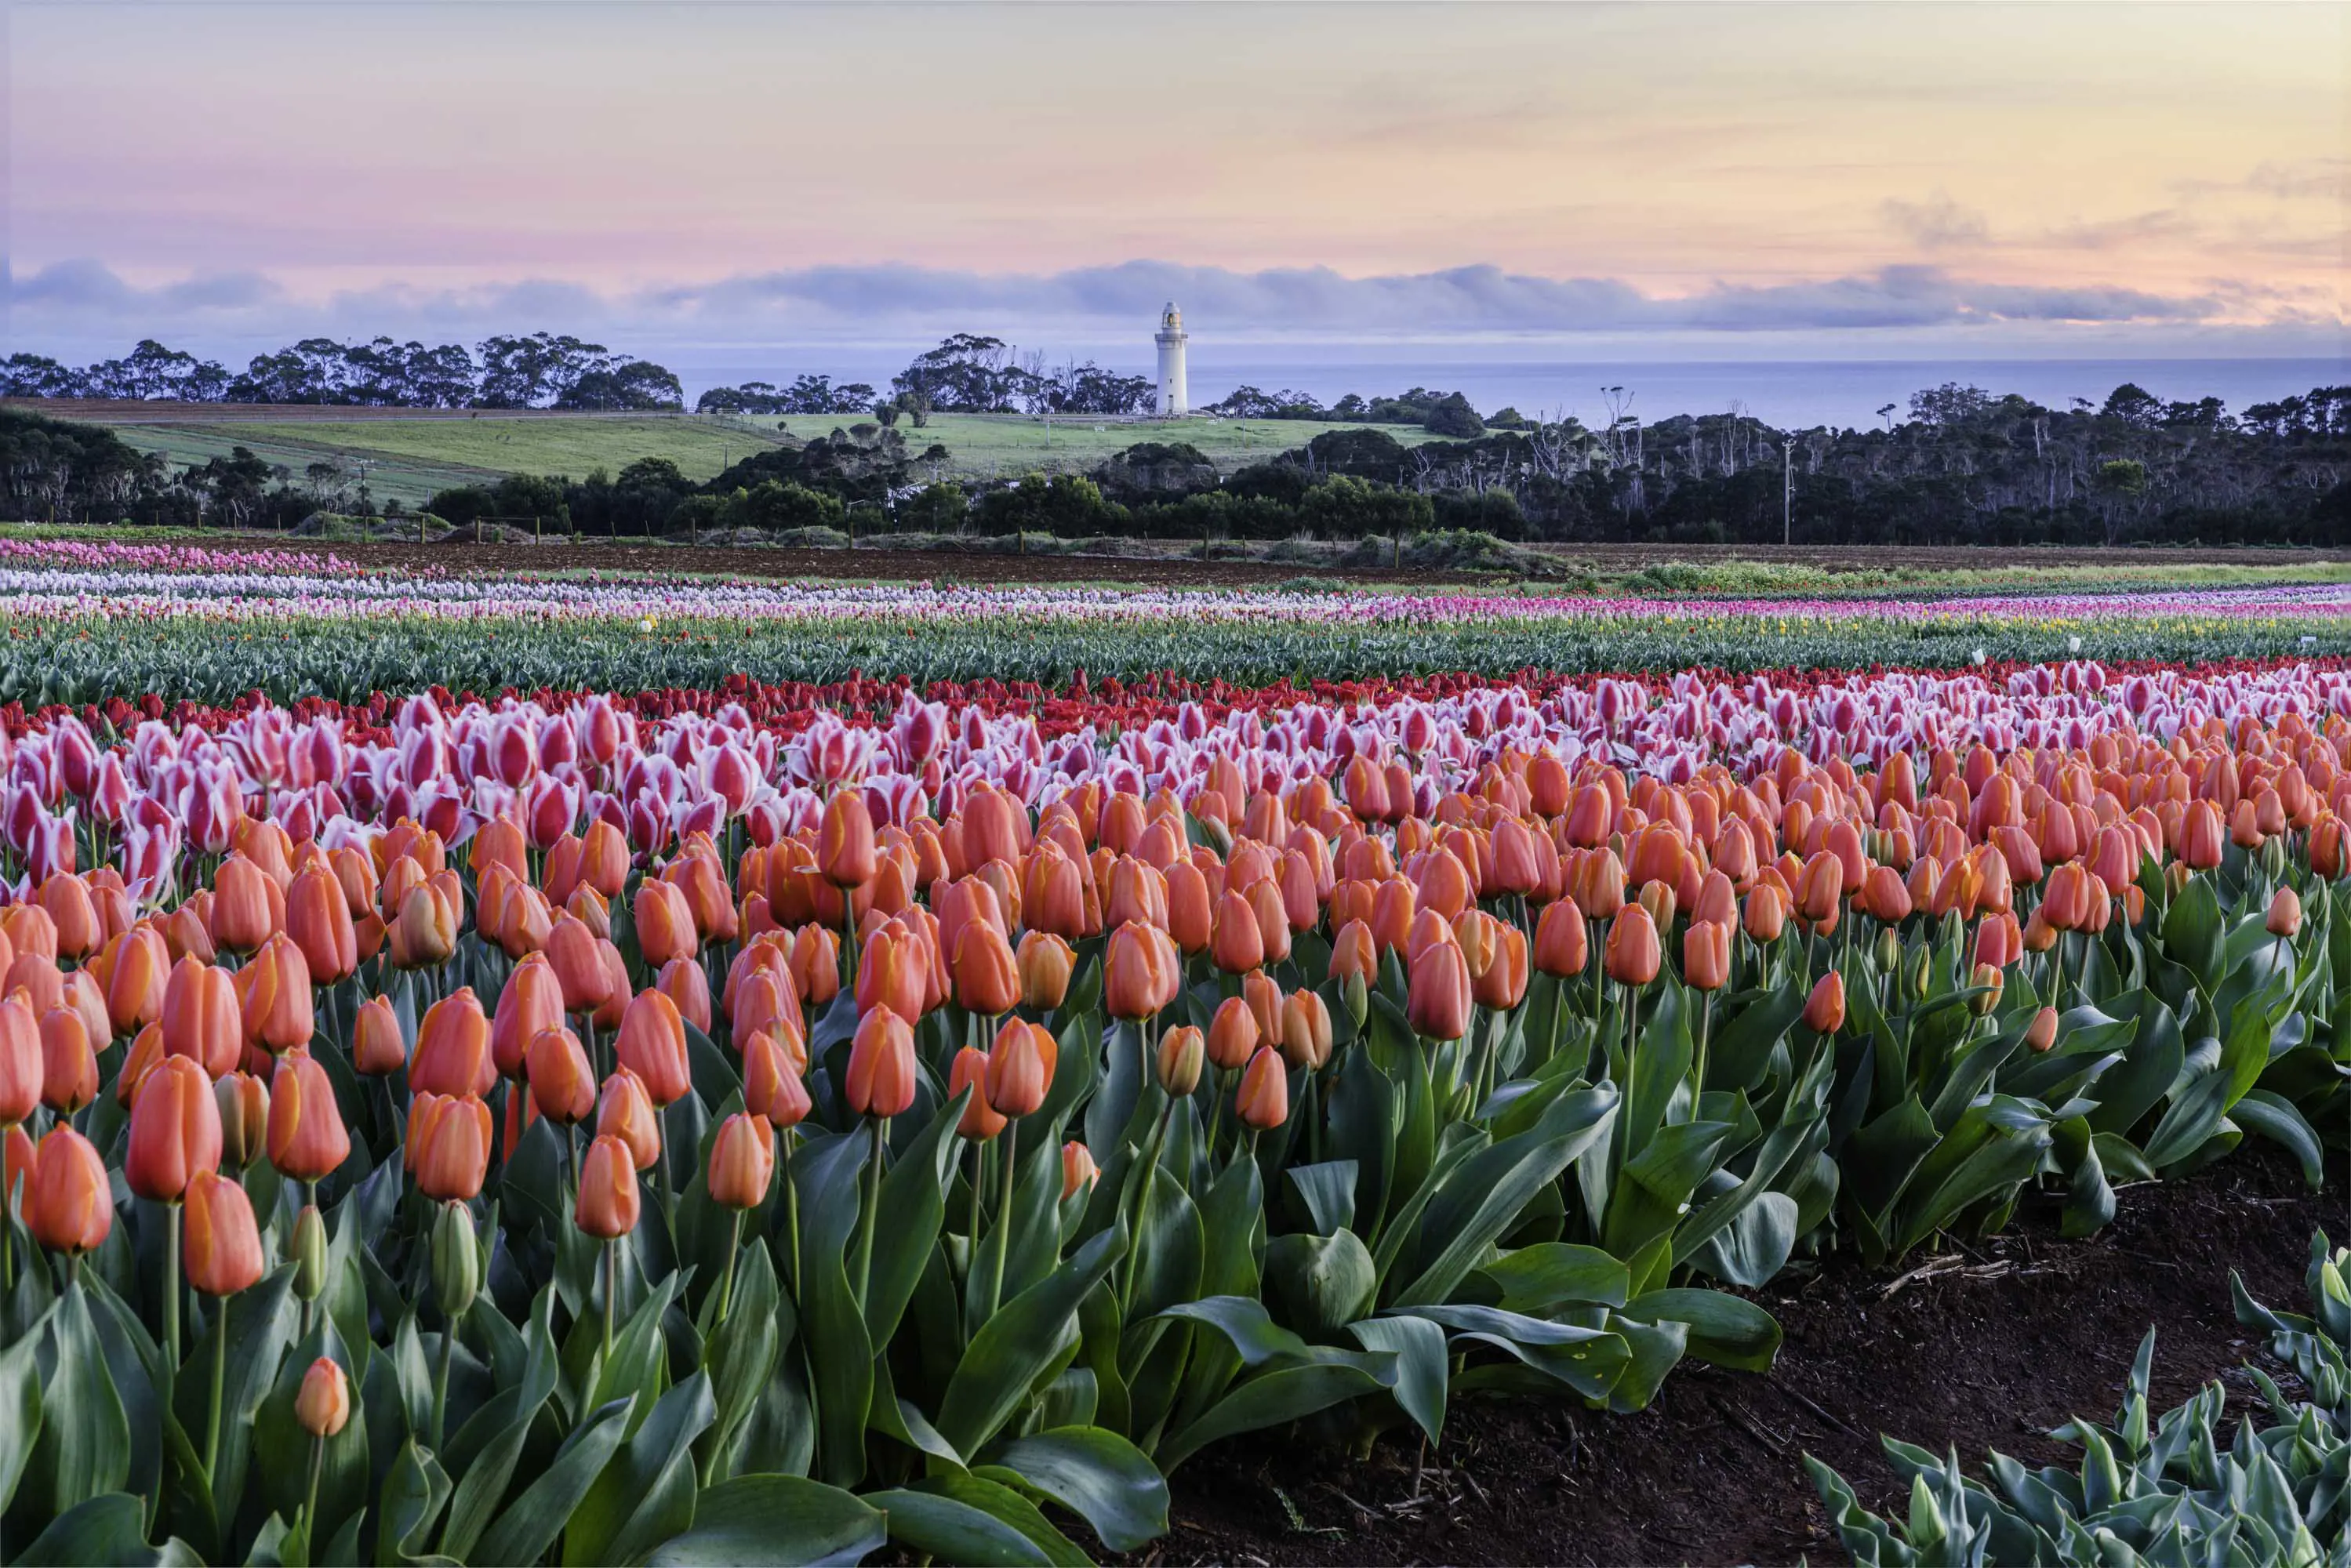 Bright red tulips stand in a row in a large field, with a light house in the background at sunset.